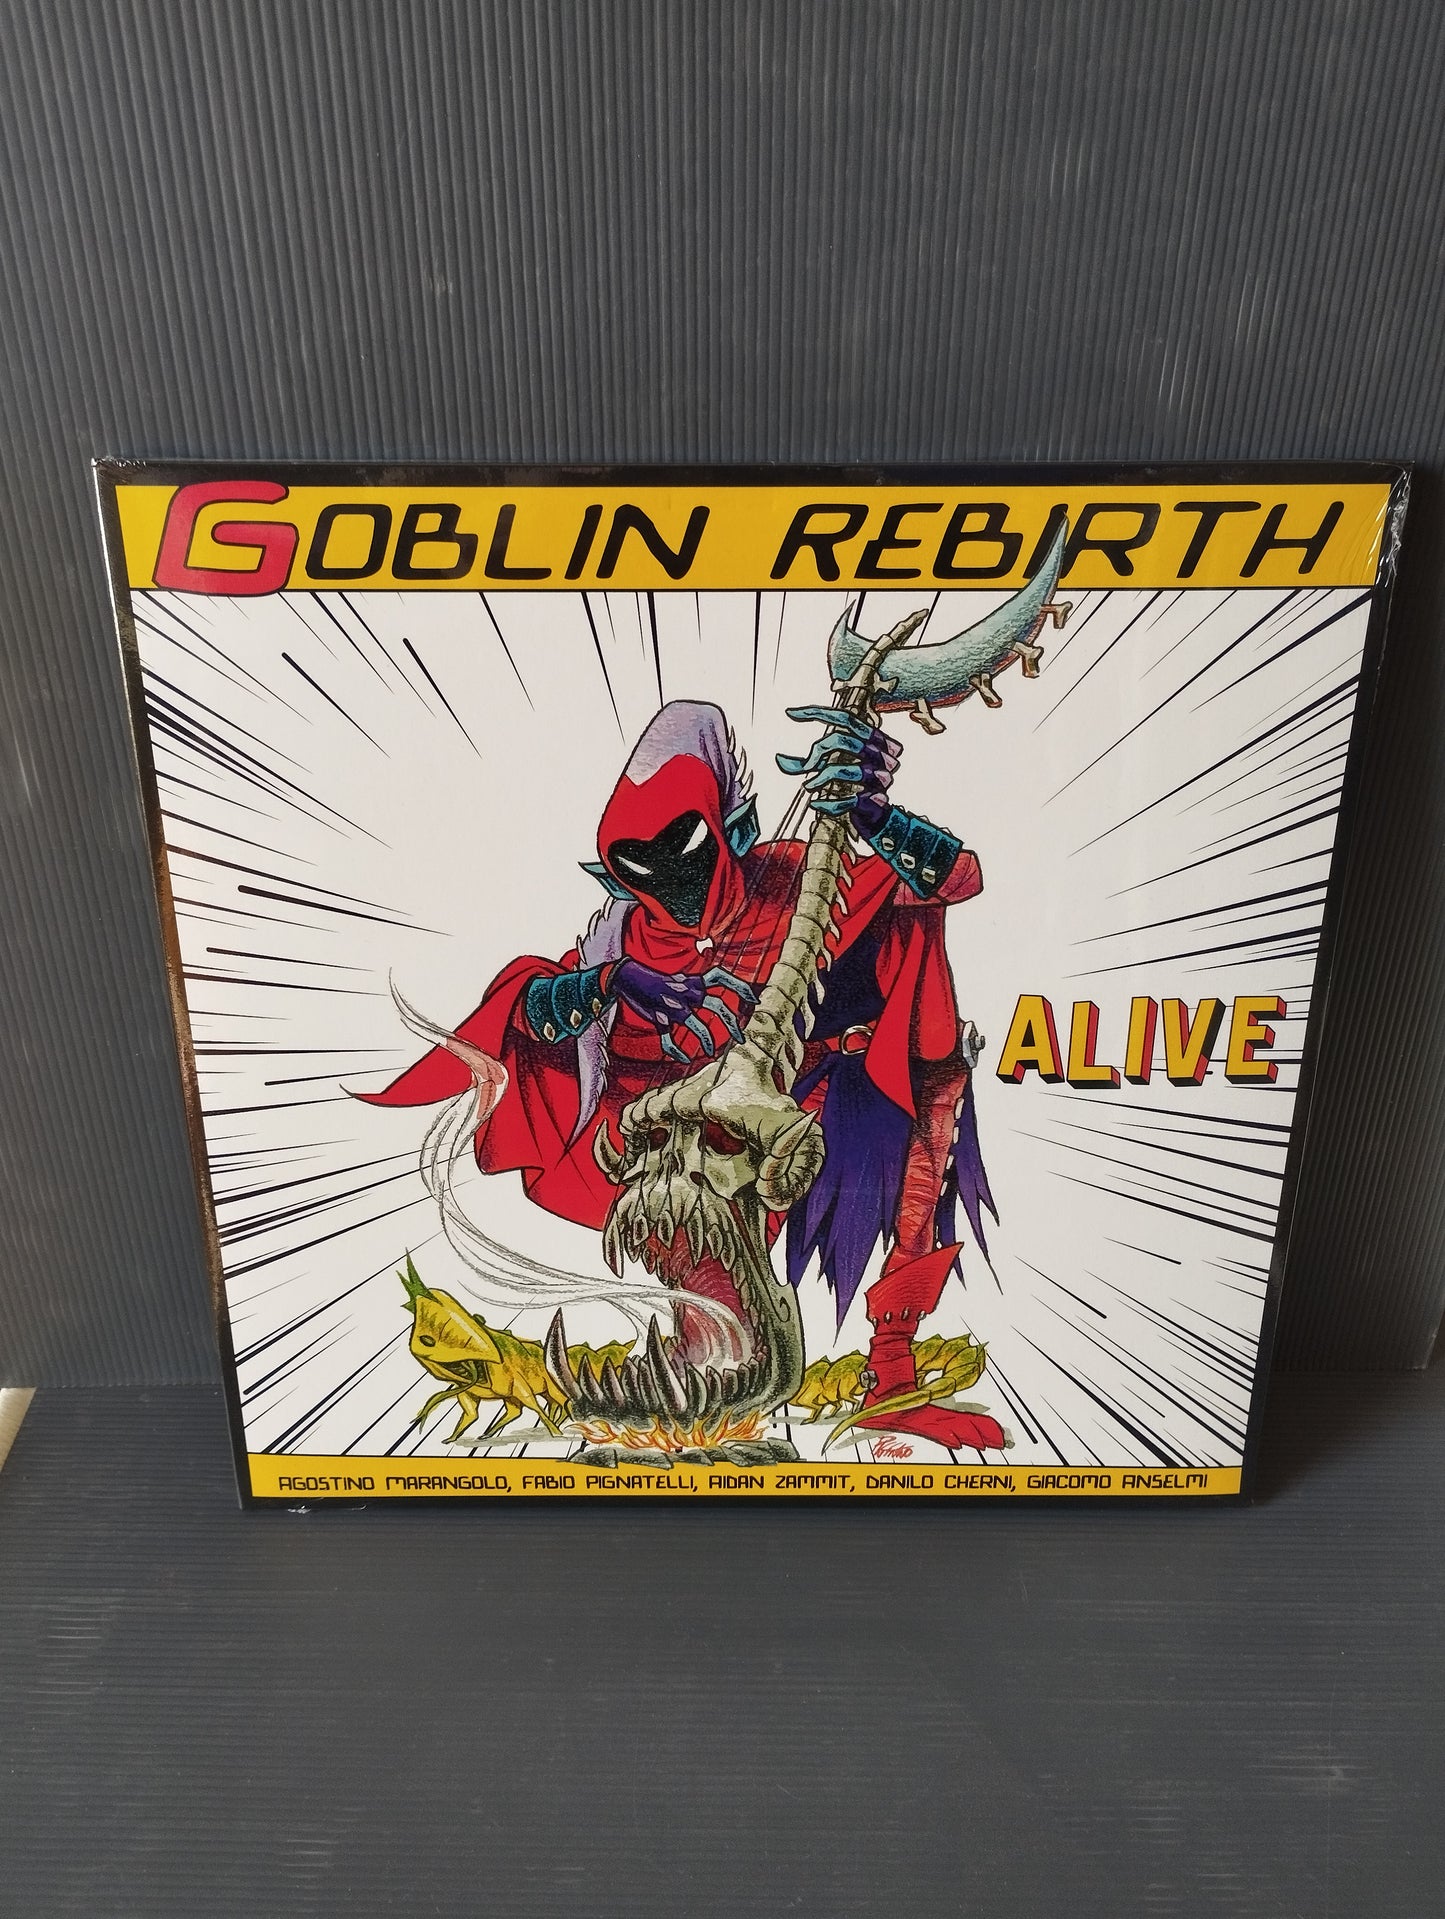 Alive" Goblin Rebirth Lp 33 rpm

 Published in 2020 by Progressively/